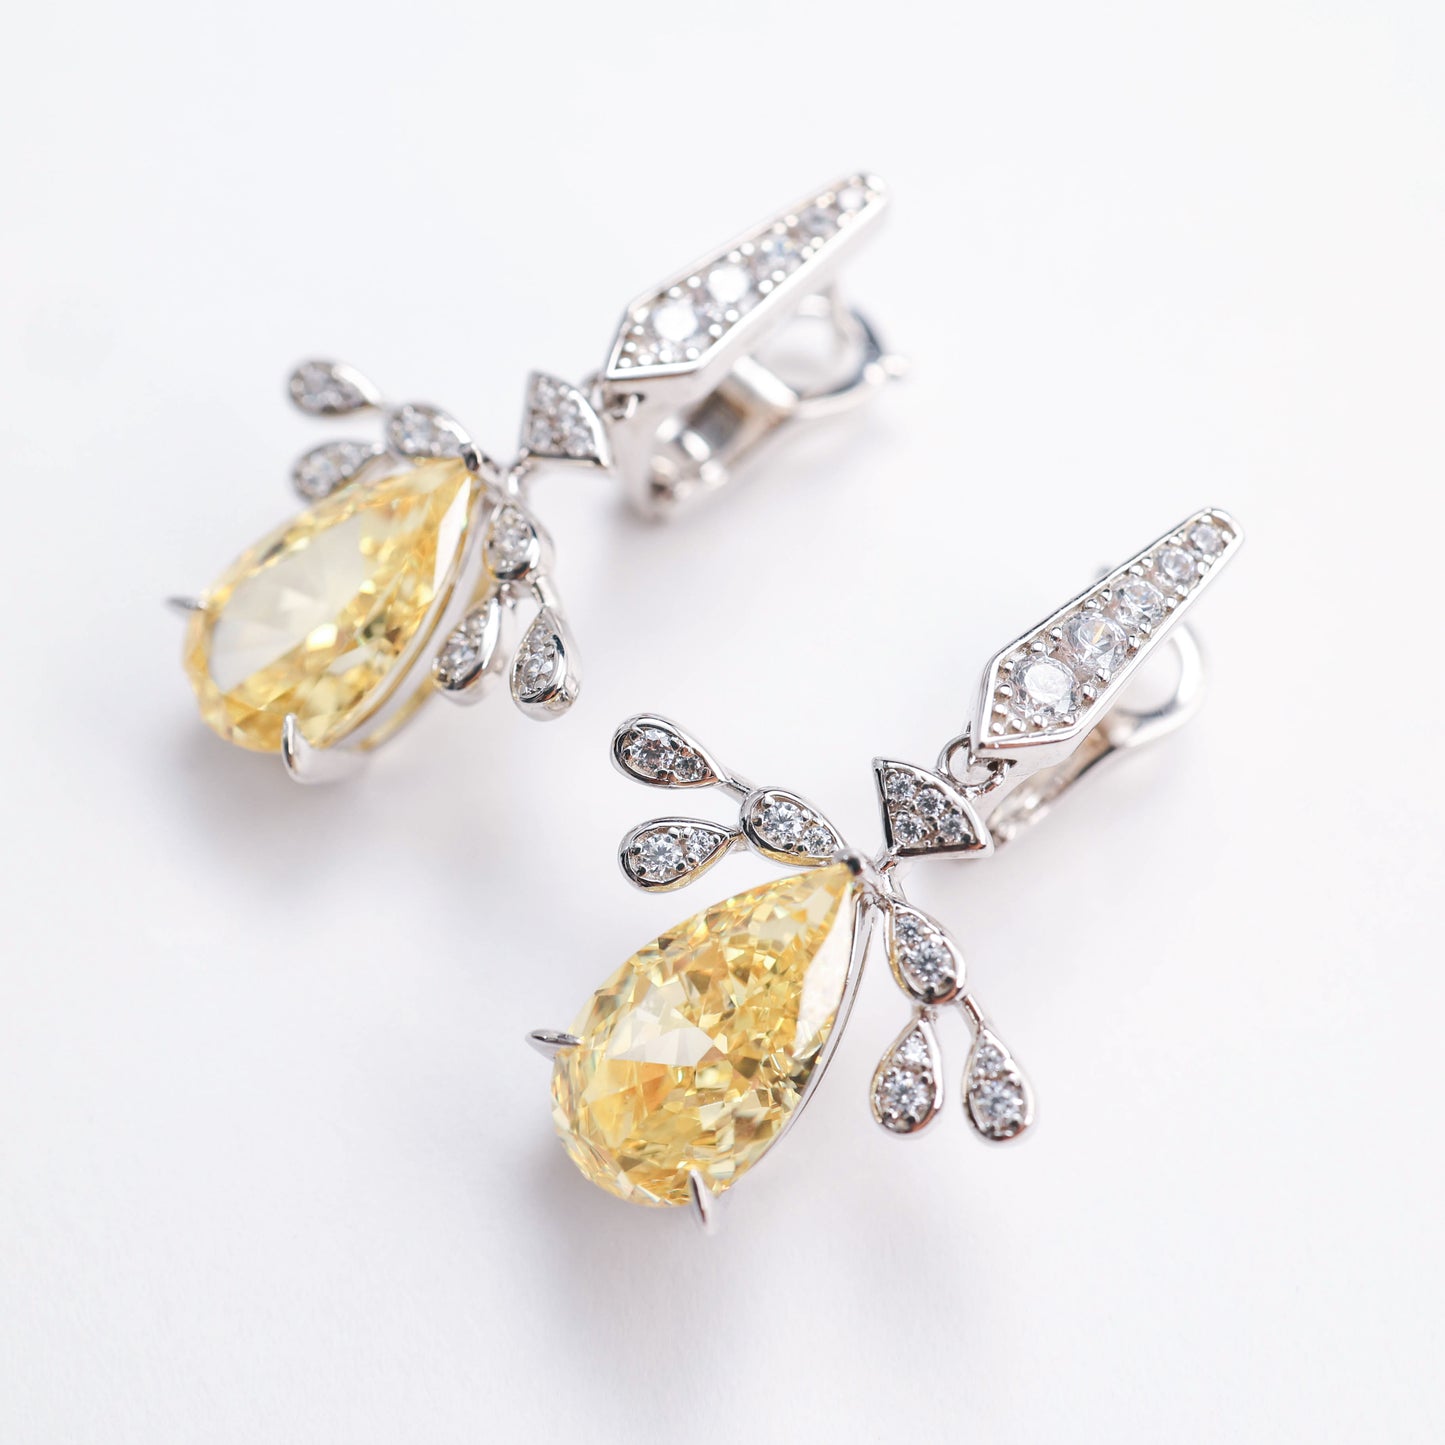 Micro-setting Yellow diamond color Lab created stones Angel's Wings earrings. sterling silver.